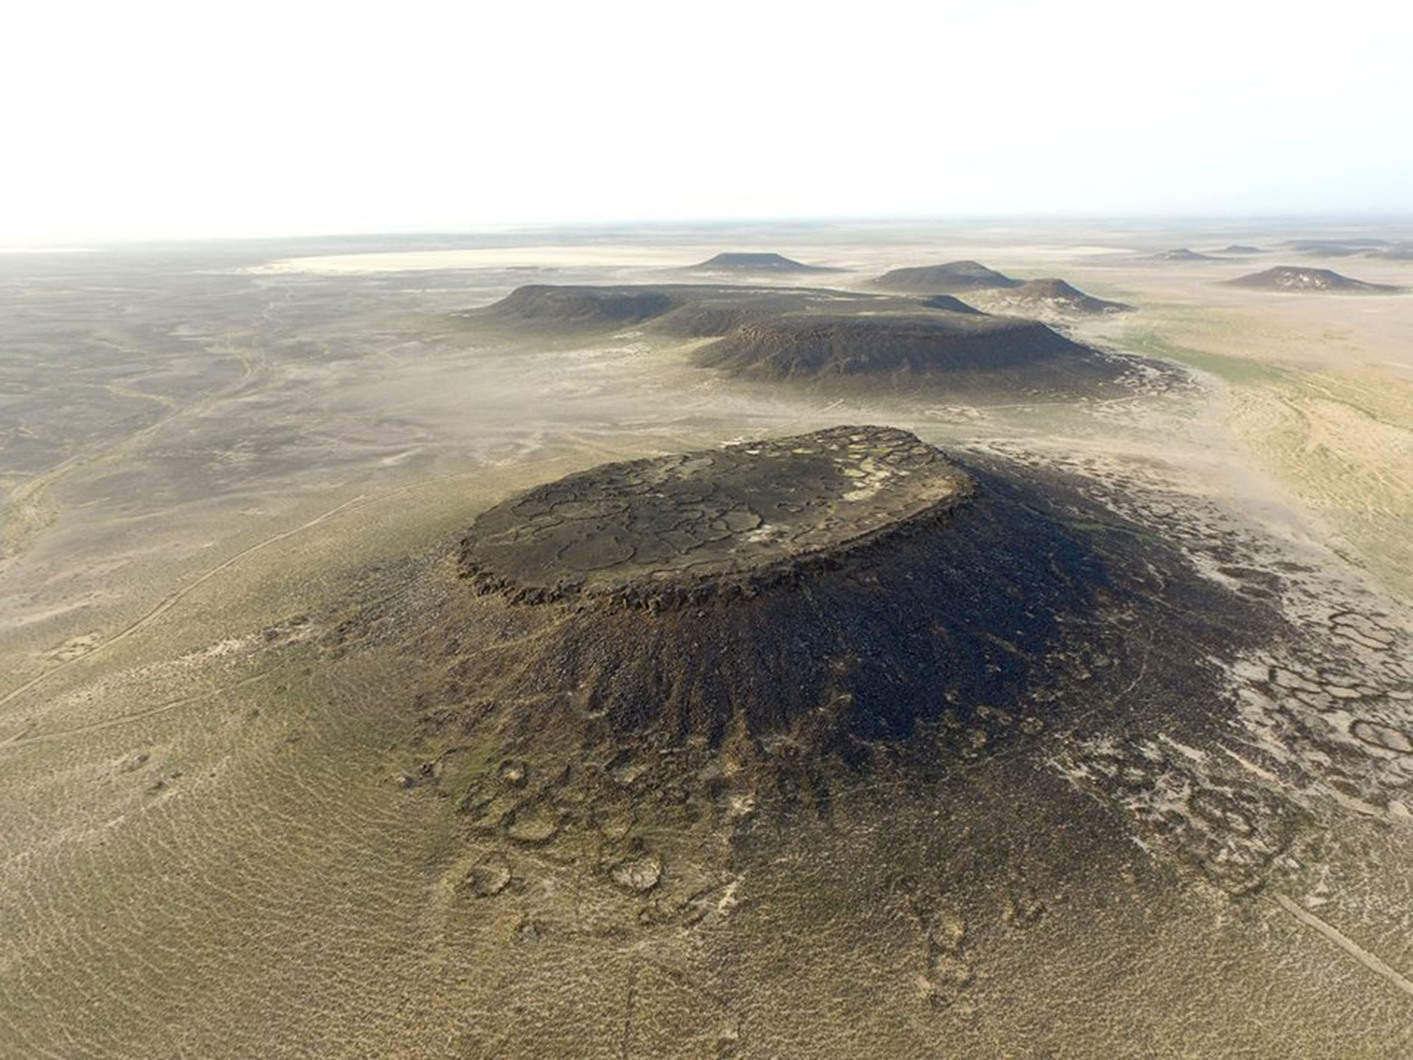 Mesa M-4 (“Maitland’s Hillfort”) in Wadi al-Qattafi in the Black Desert. Numerous Late Neolithic dwellings and corrals are located on the slopes and at the foot of the mesa (Photo by A.C. Hill).